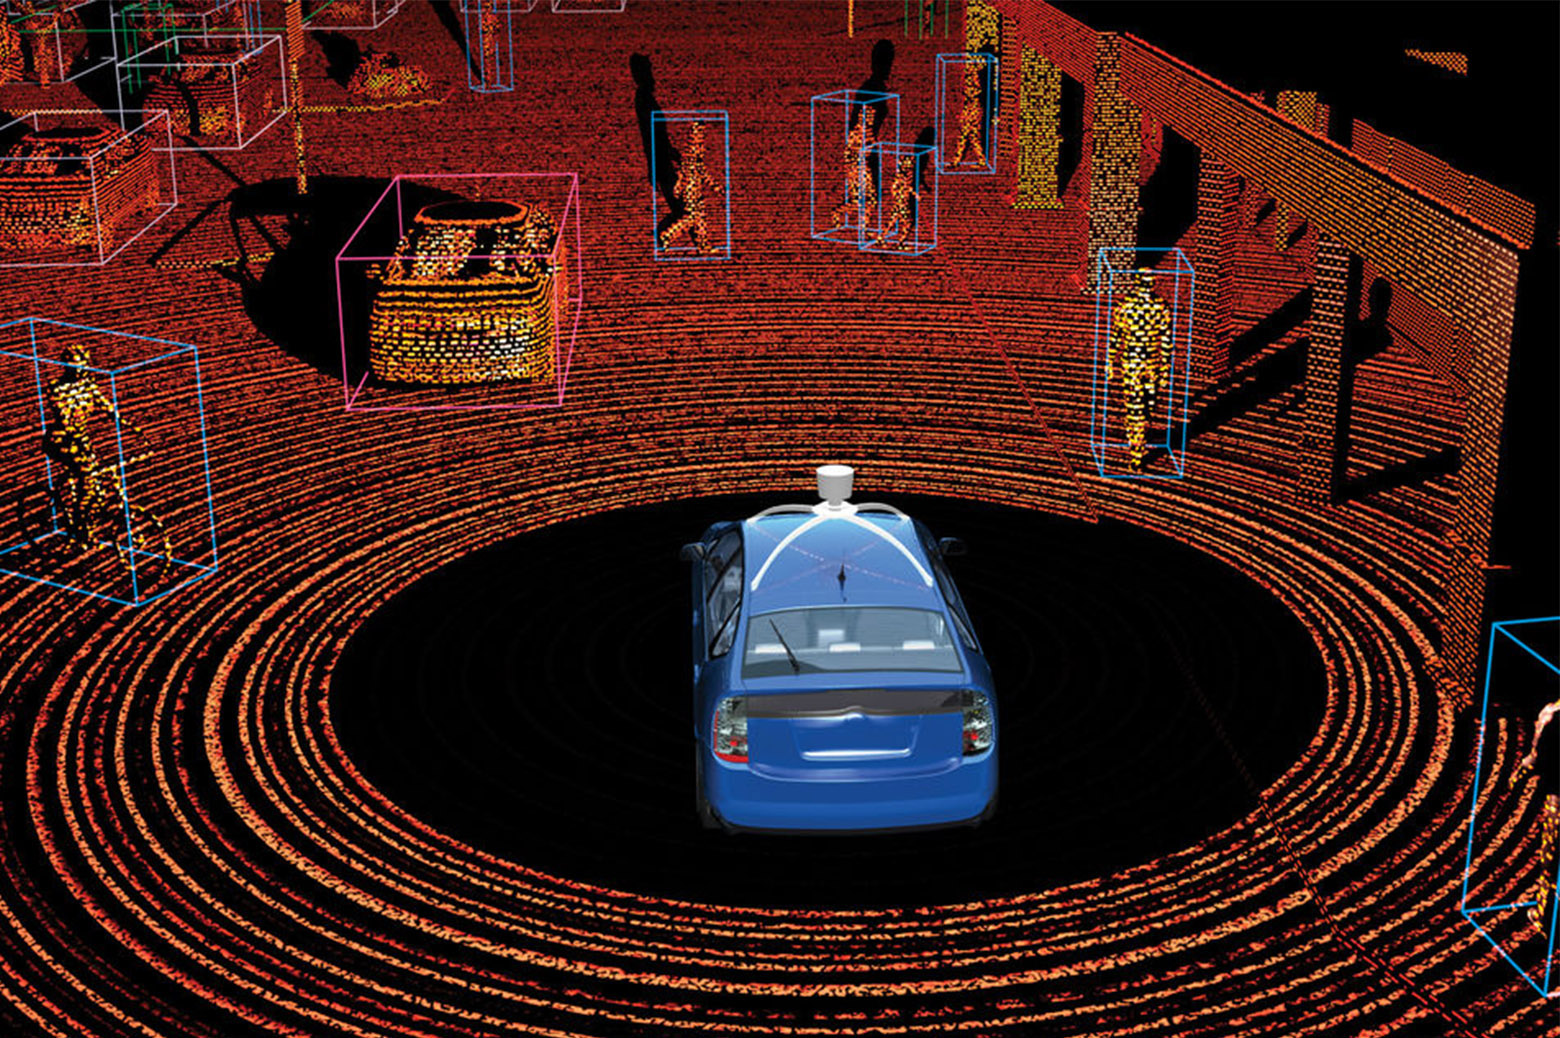 LiDAR sensors and what they see